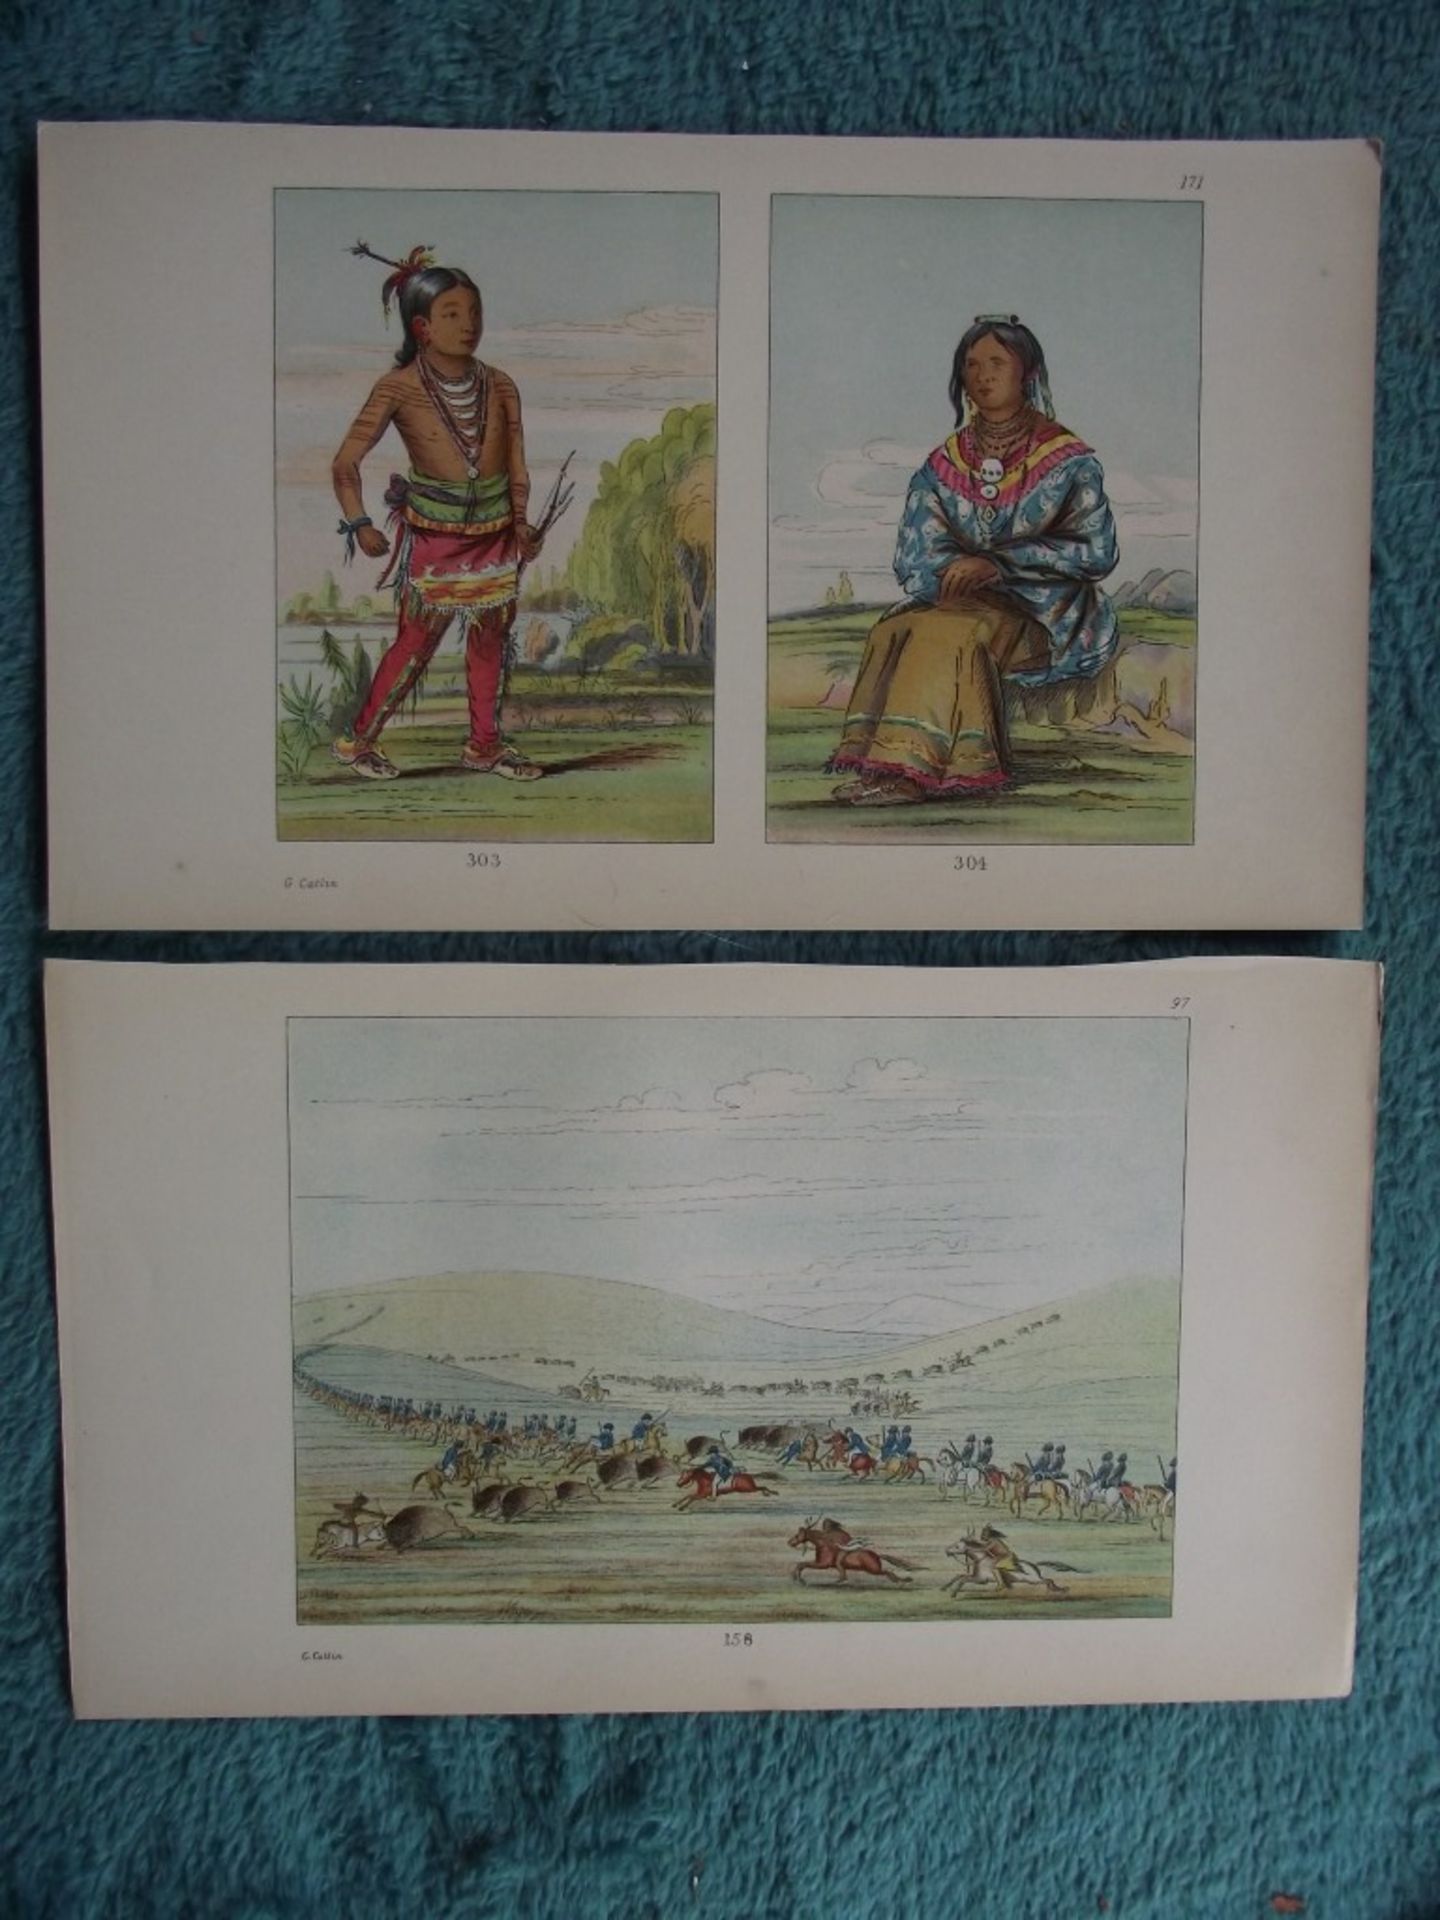 65 X book plates - George Catlin - Illustrations of the North American Indians - Circa 1876 - Image 13 of 40